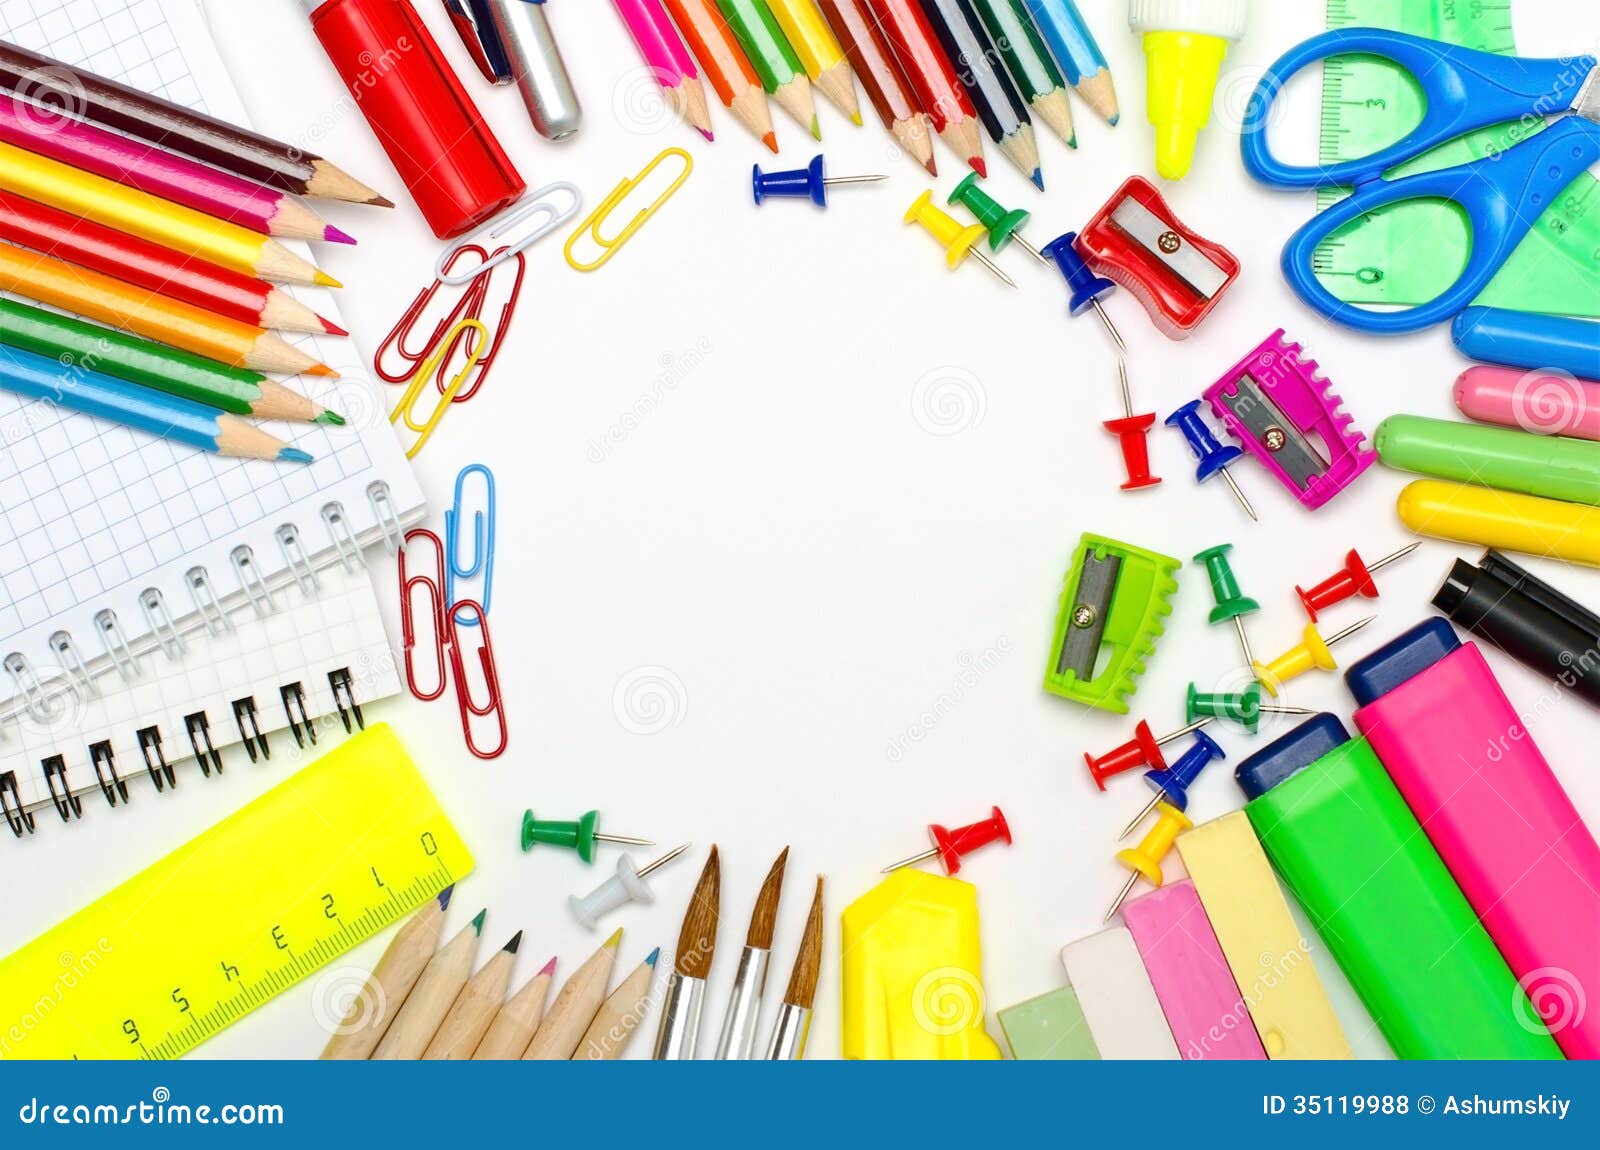 free office stationery clipart - photo #28